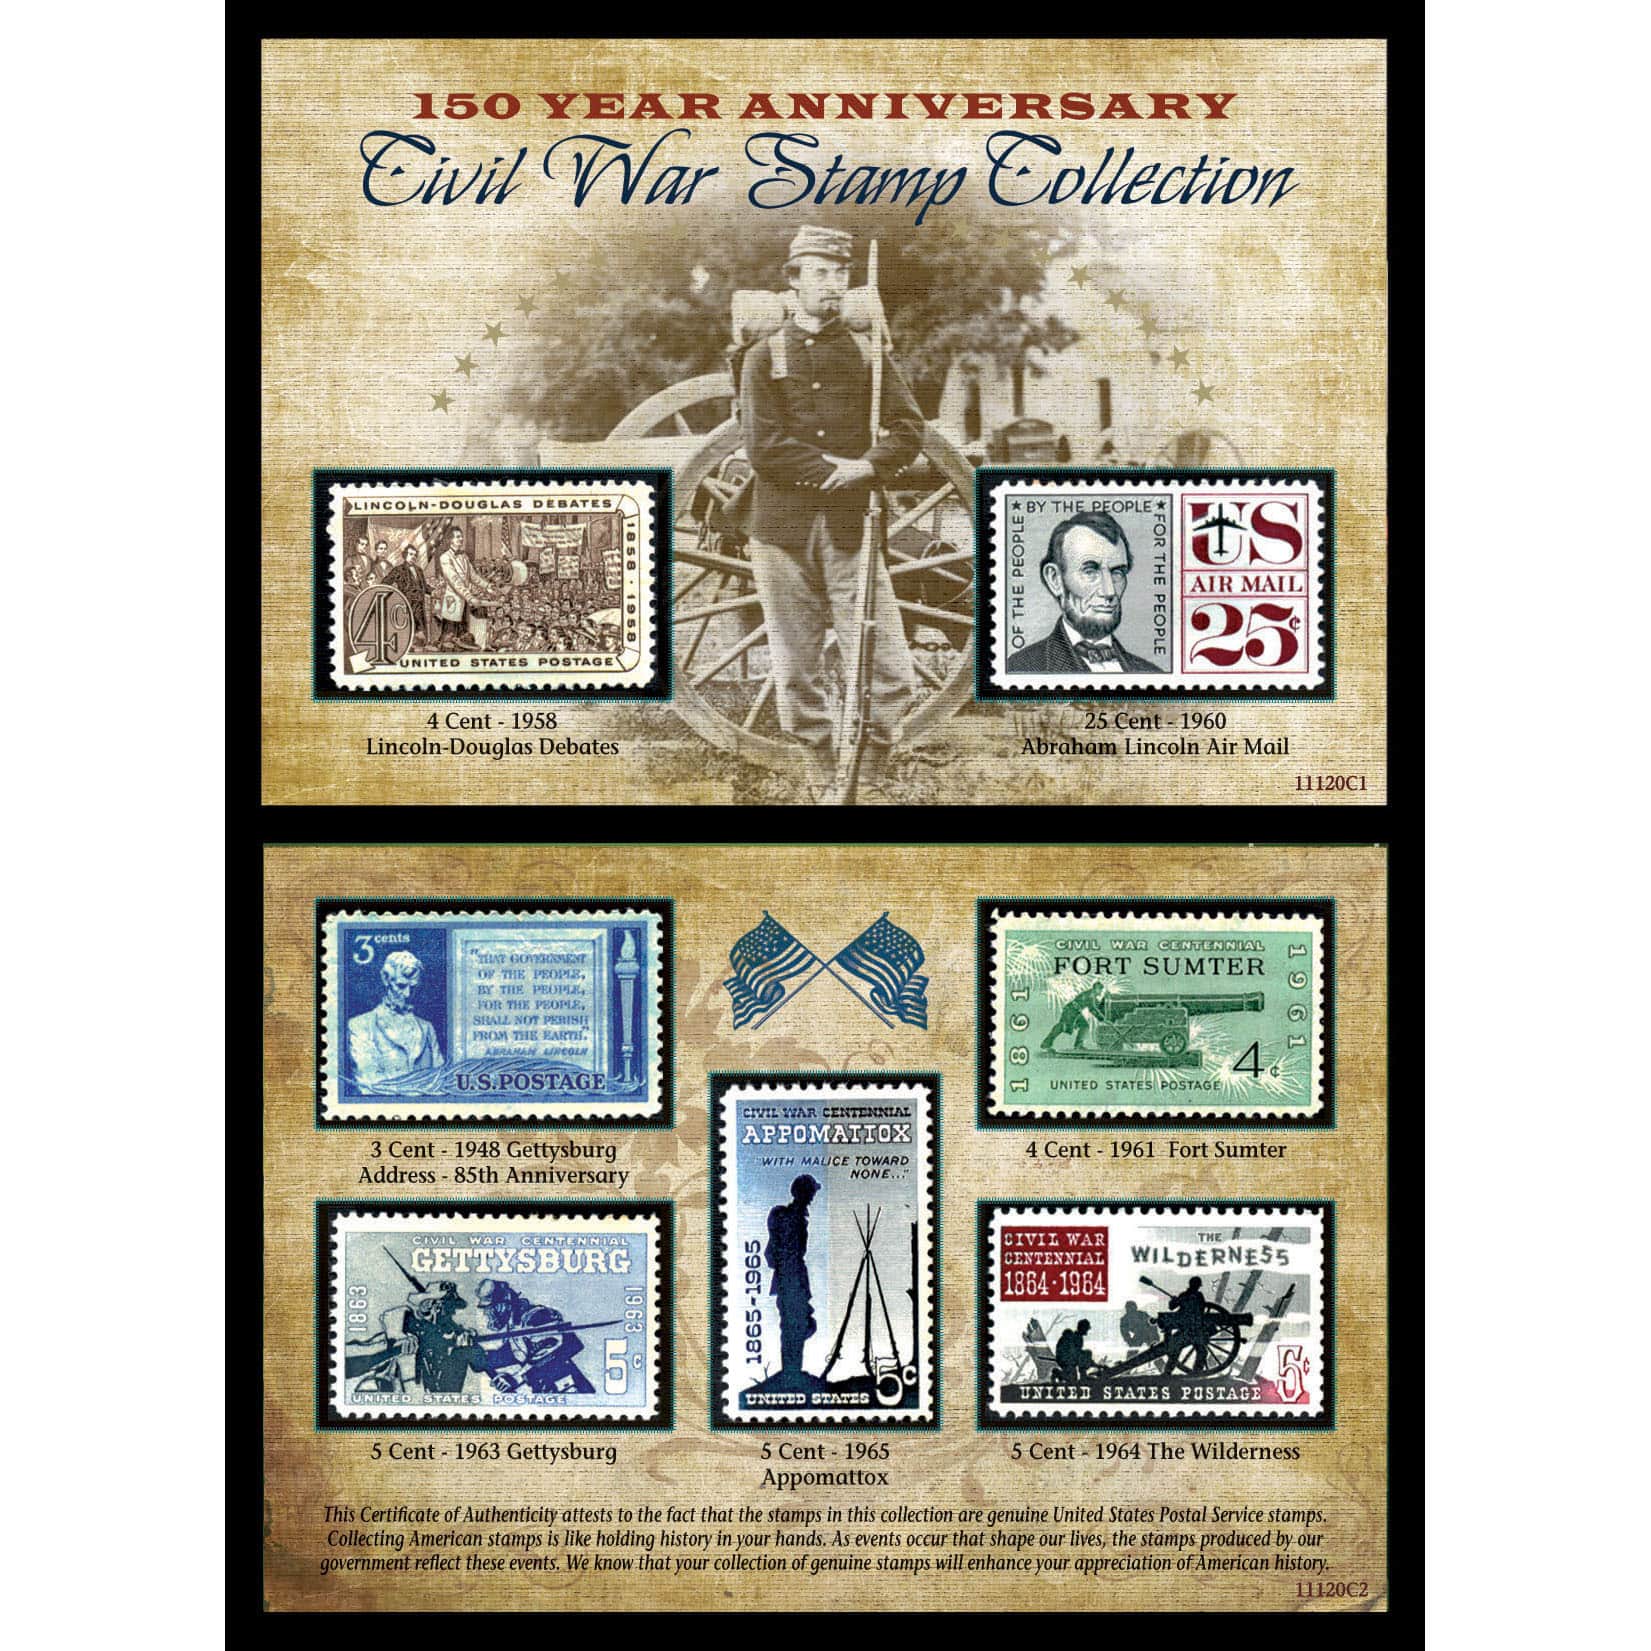 US Postage 1960 Year Set of Commemorative Postage Stamps